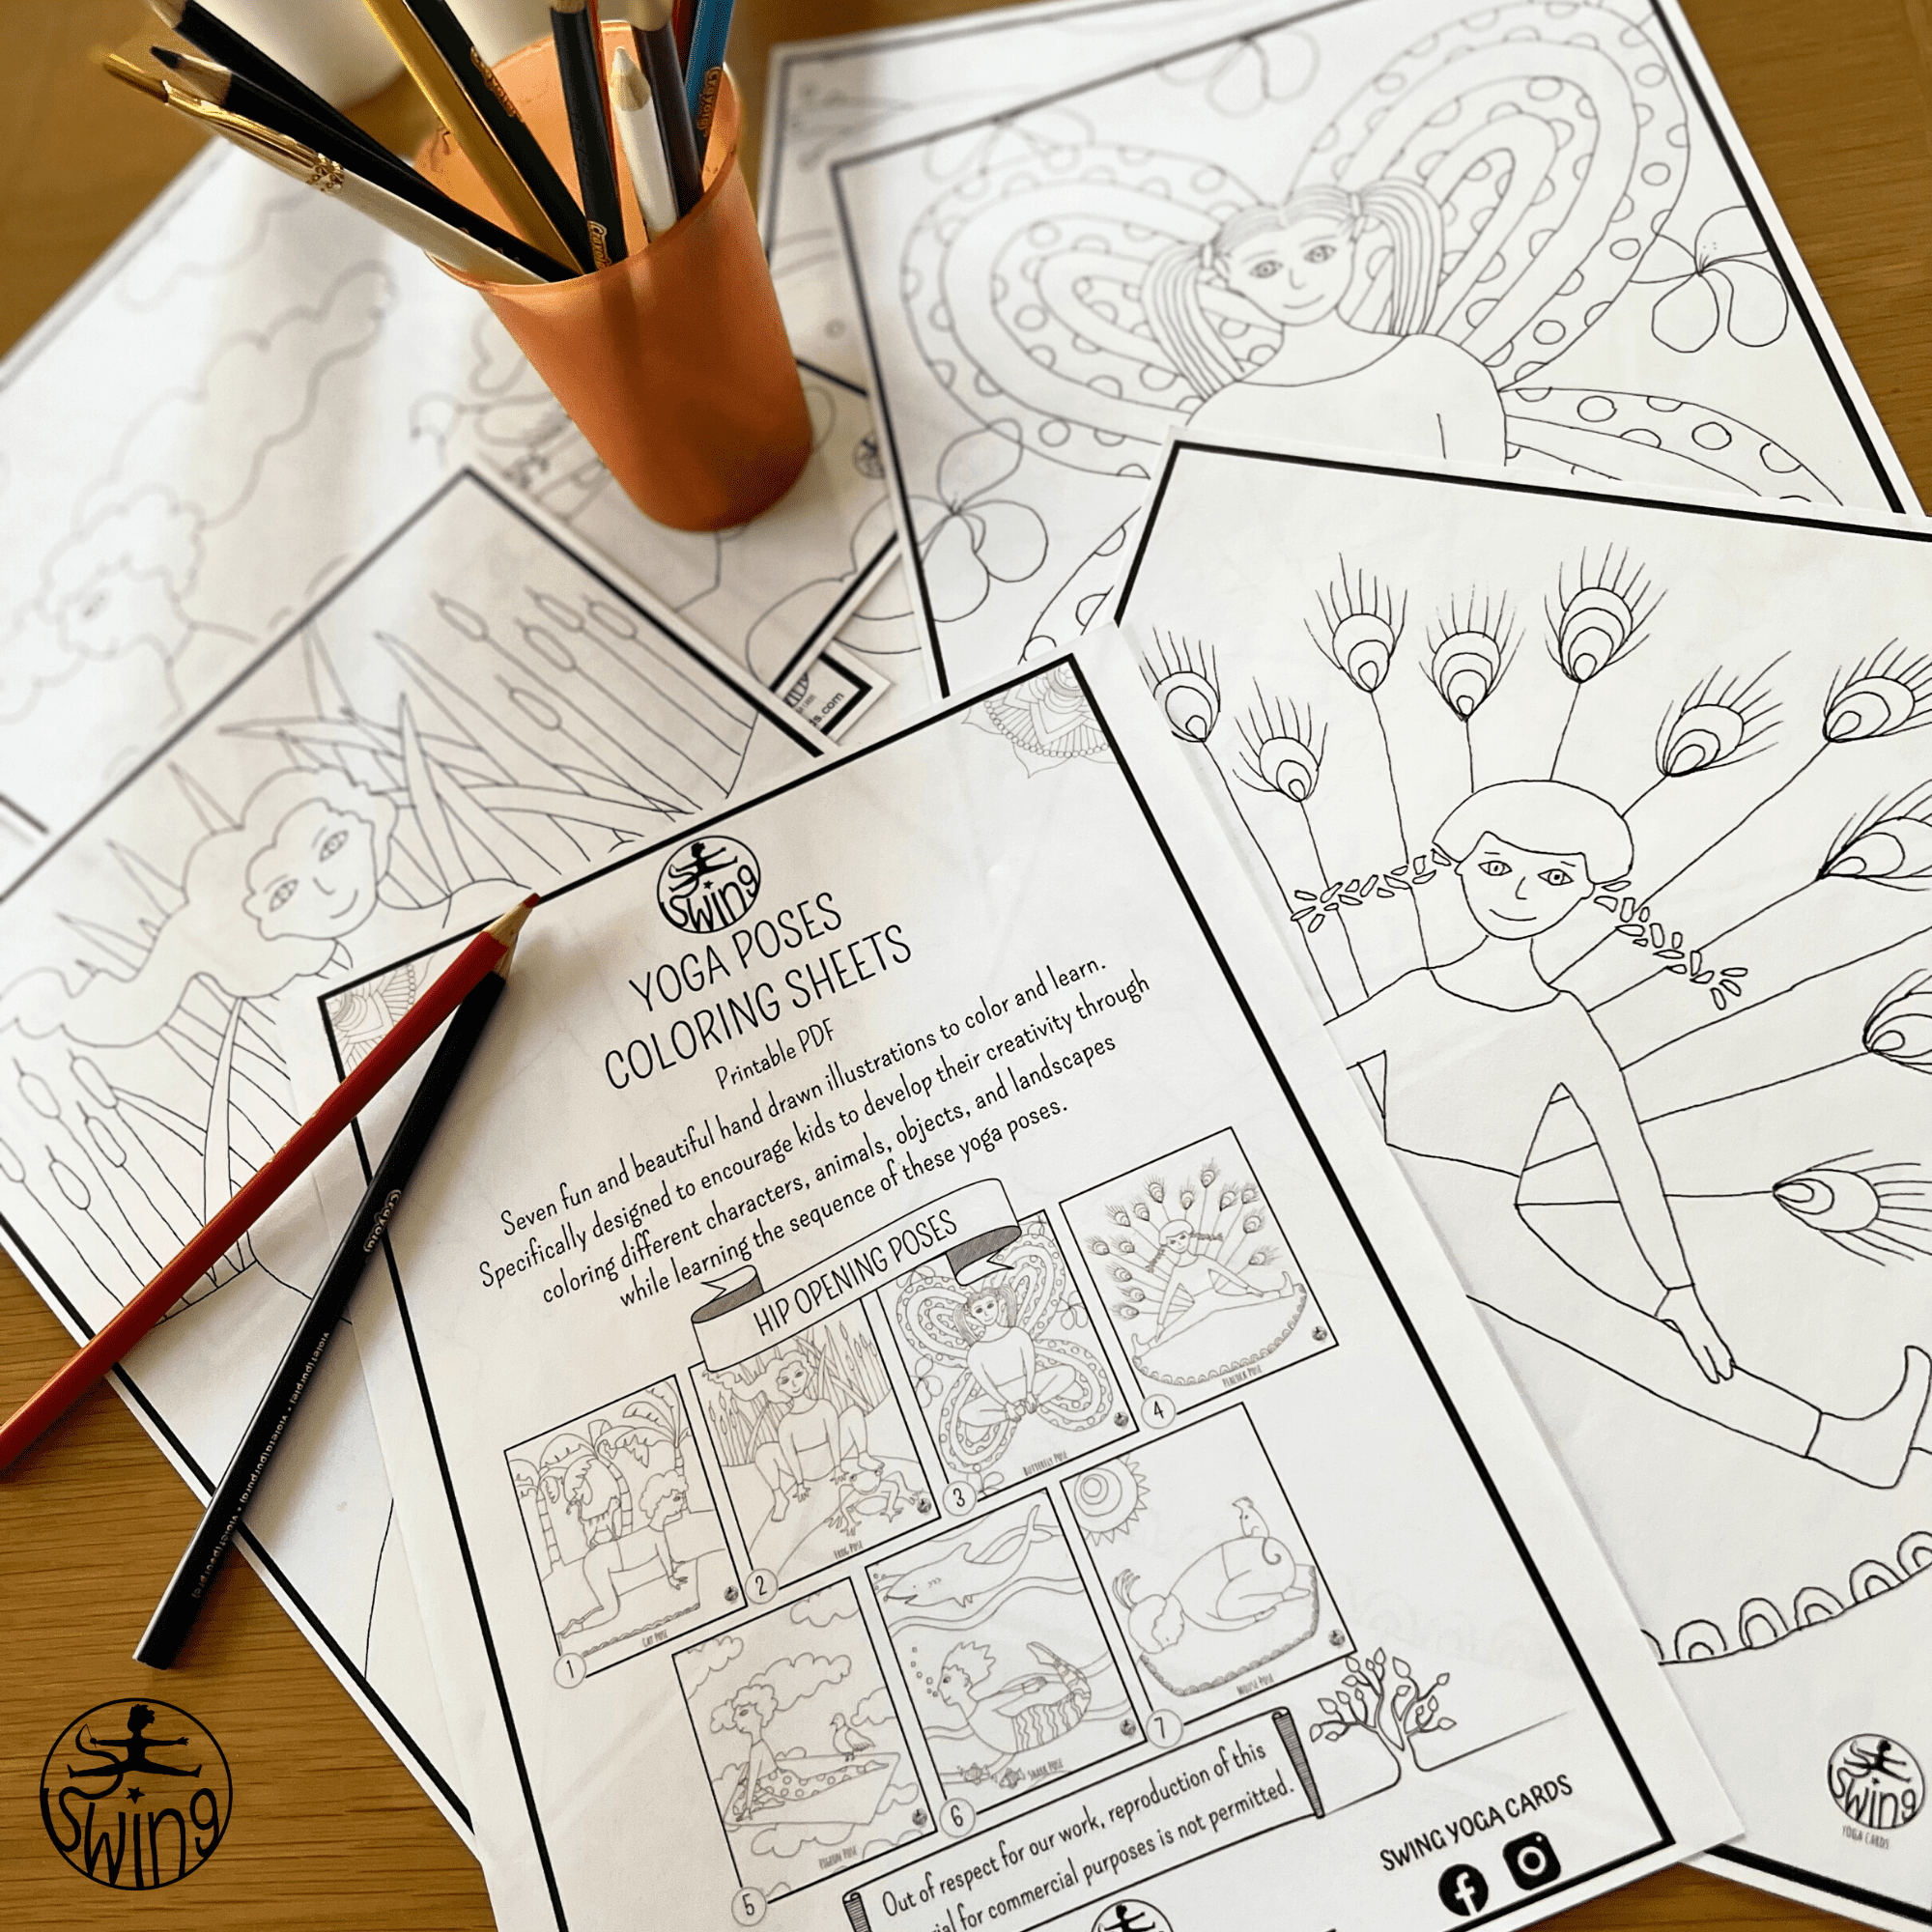 Yoga Coloring Pages for Kids Graphic by clipartgenie · Creative Fabrica